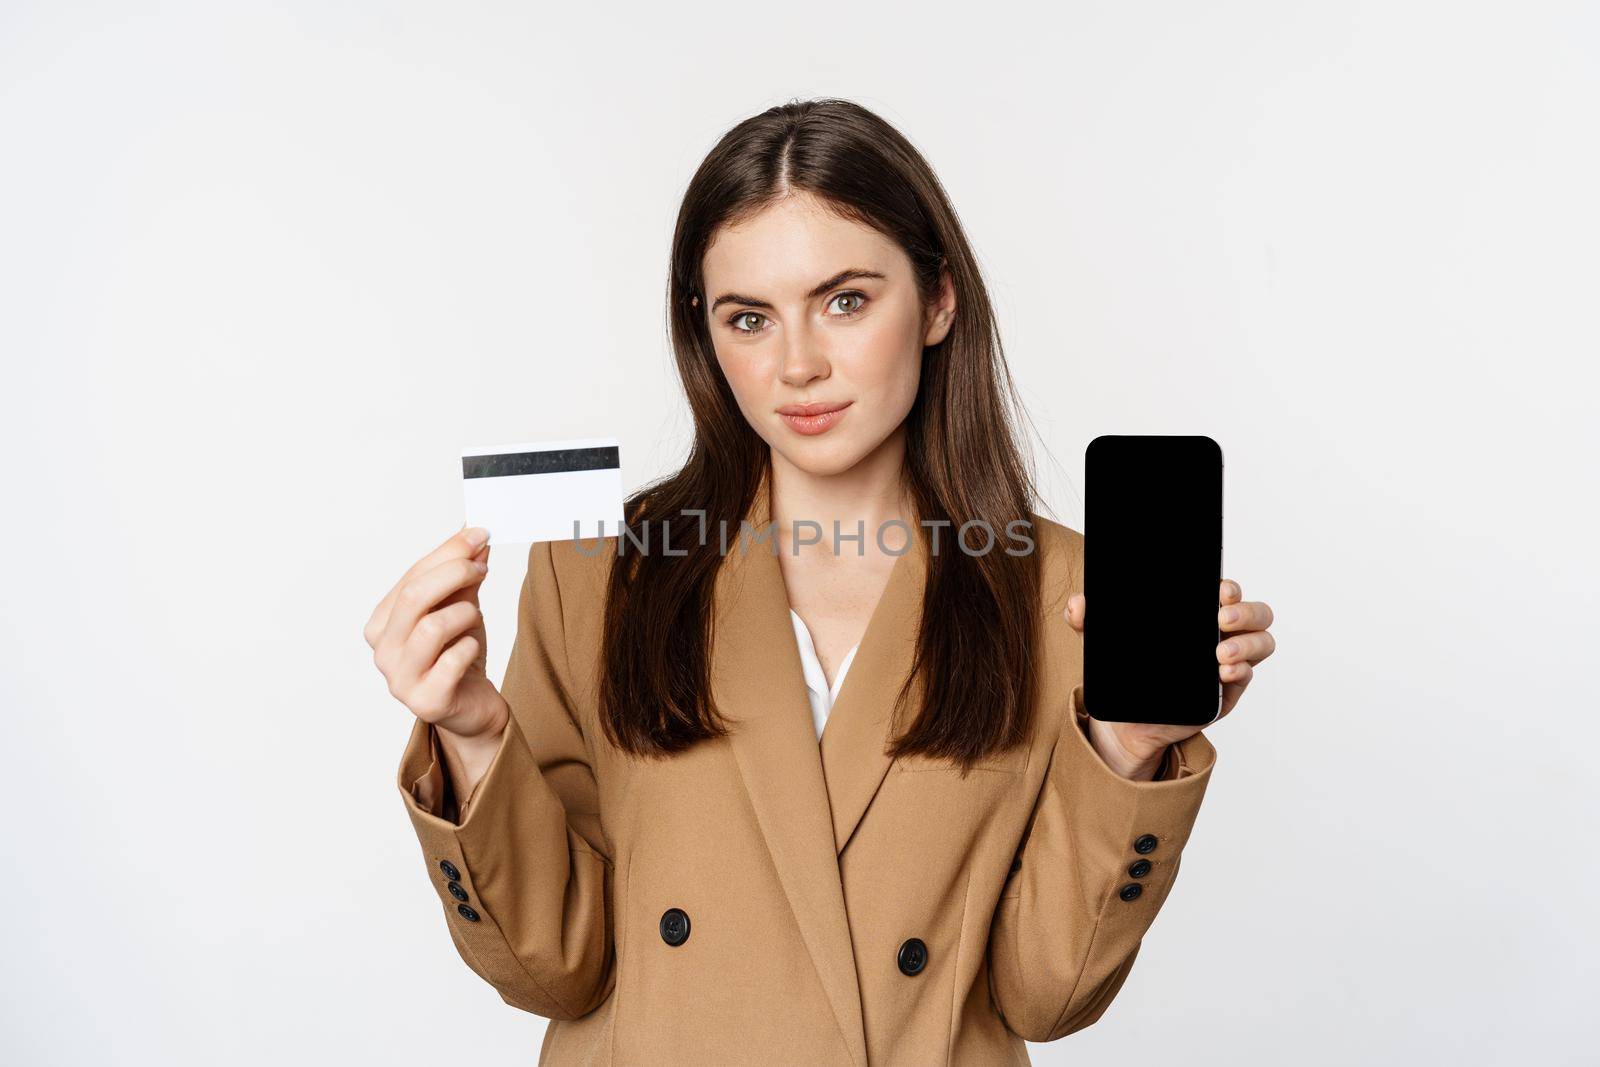 Businesswoman showing mobile phone screen and credit card, demonstrating application on smartphone, standing in suit over white background.